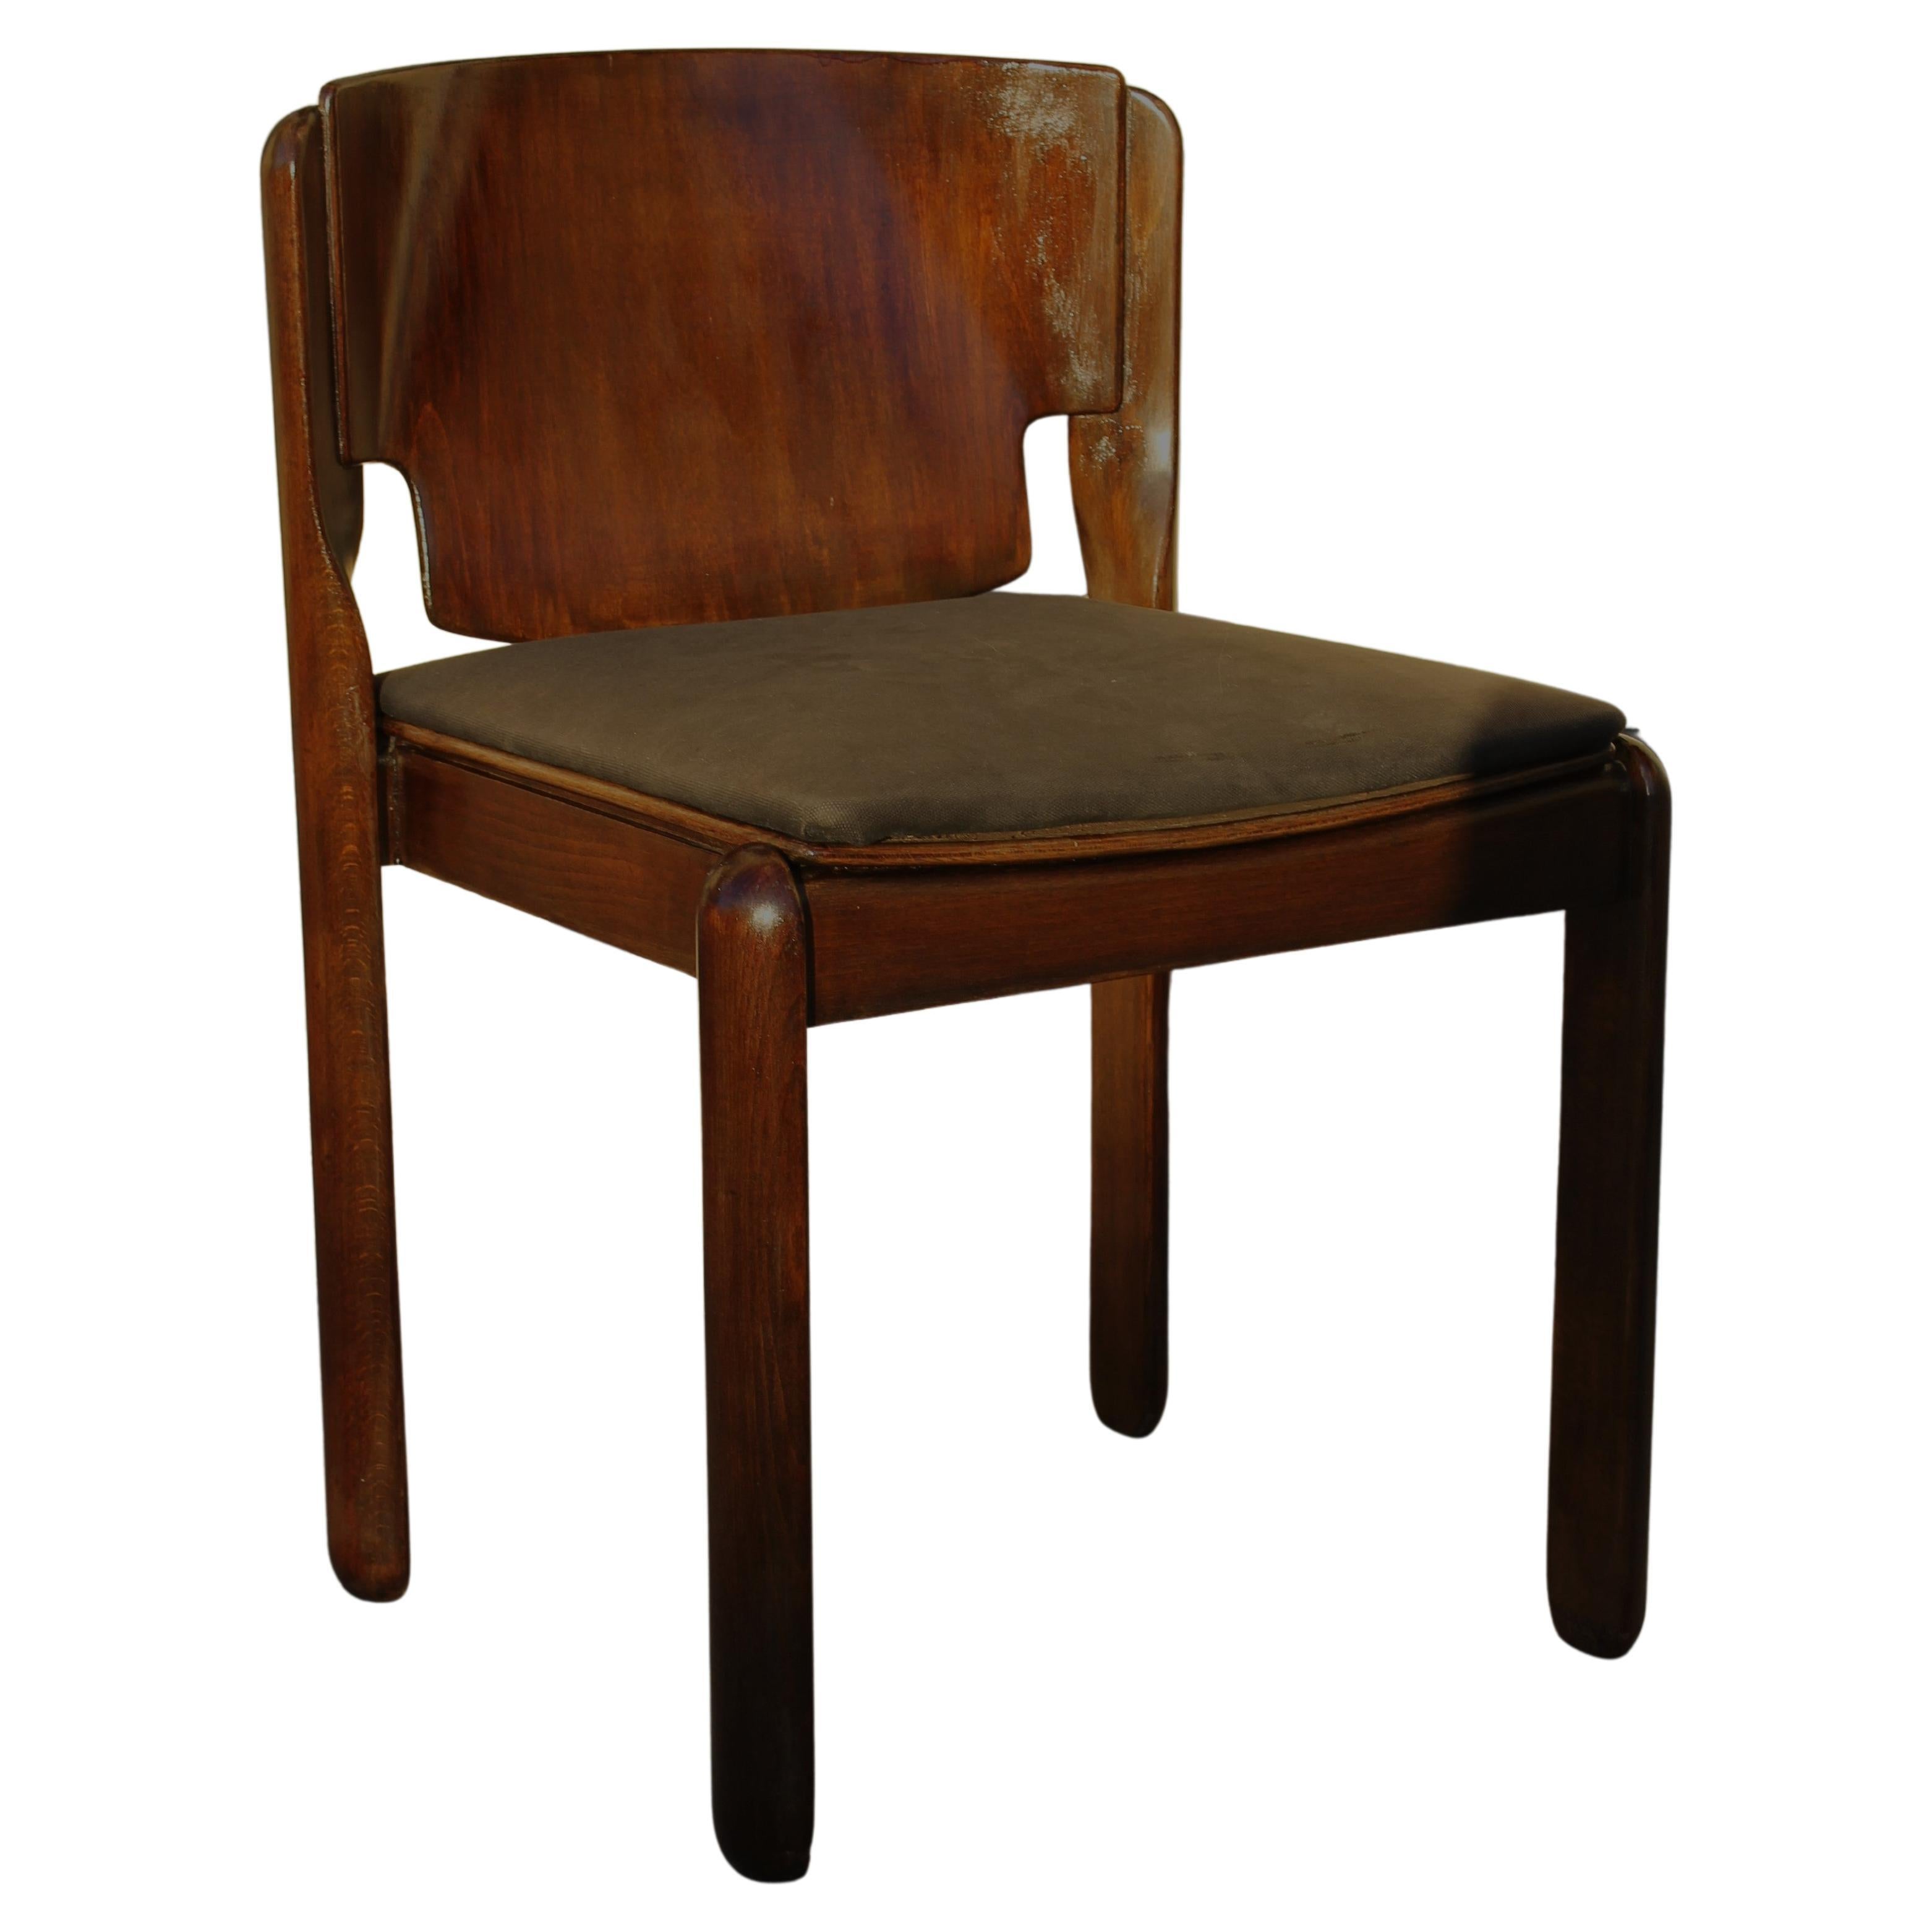  Cassina walnut chair Mod. 122 by Vico Magistretti Italy 60s (six available) For Sale